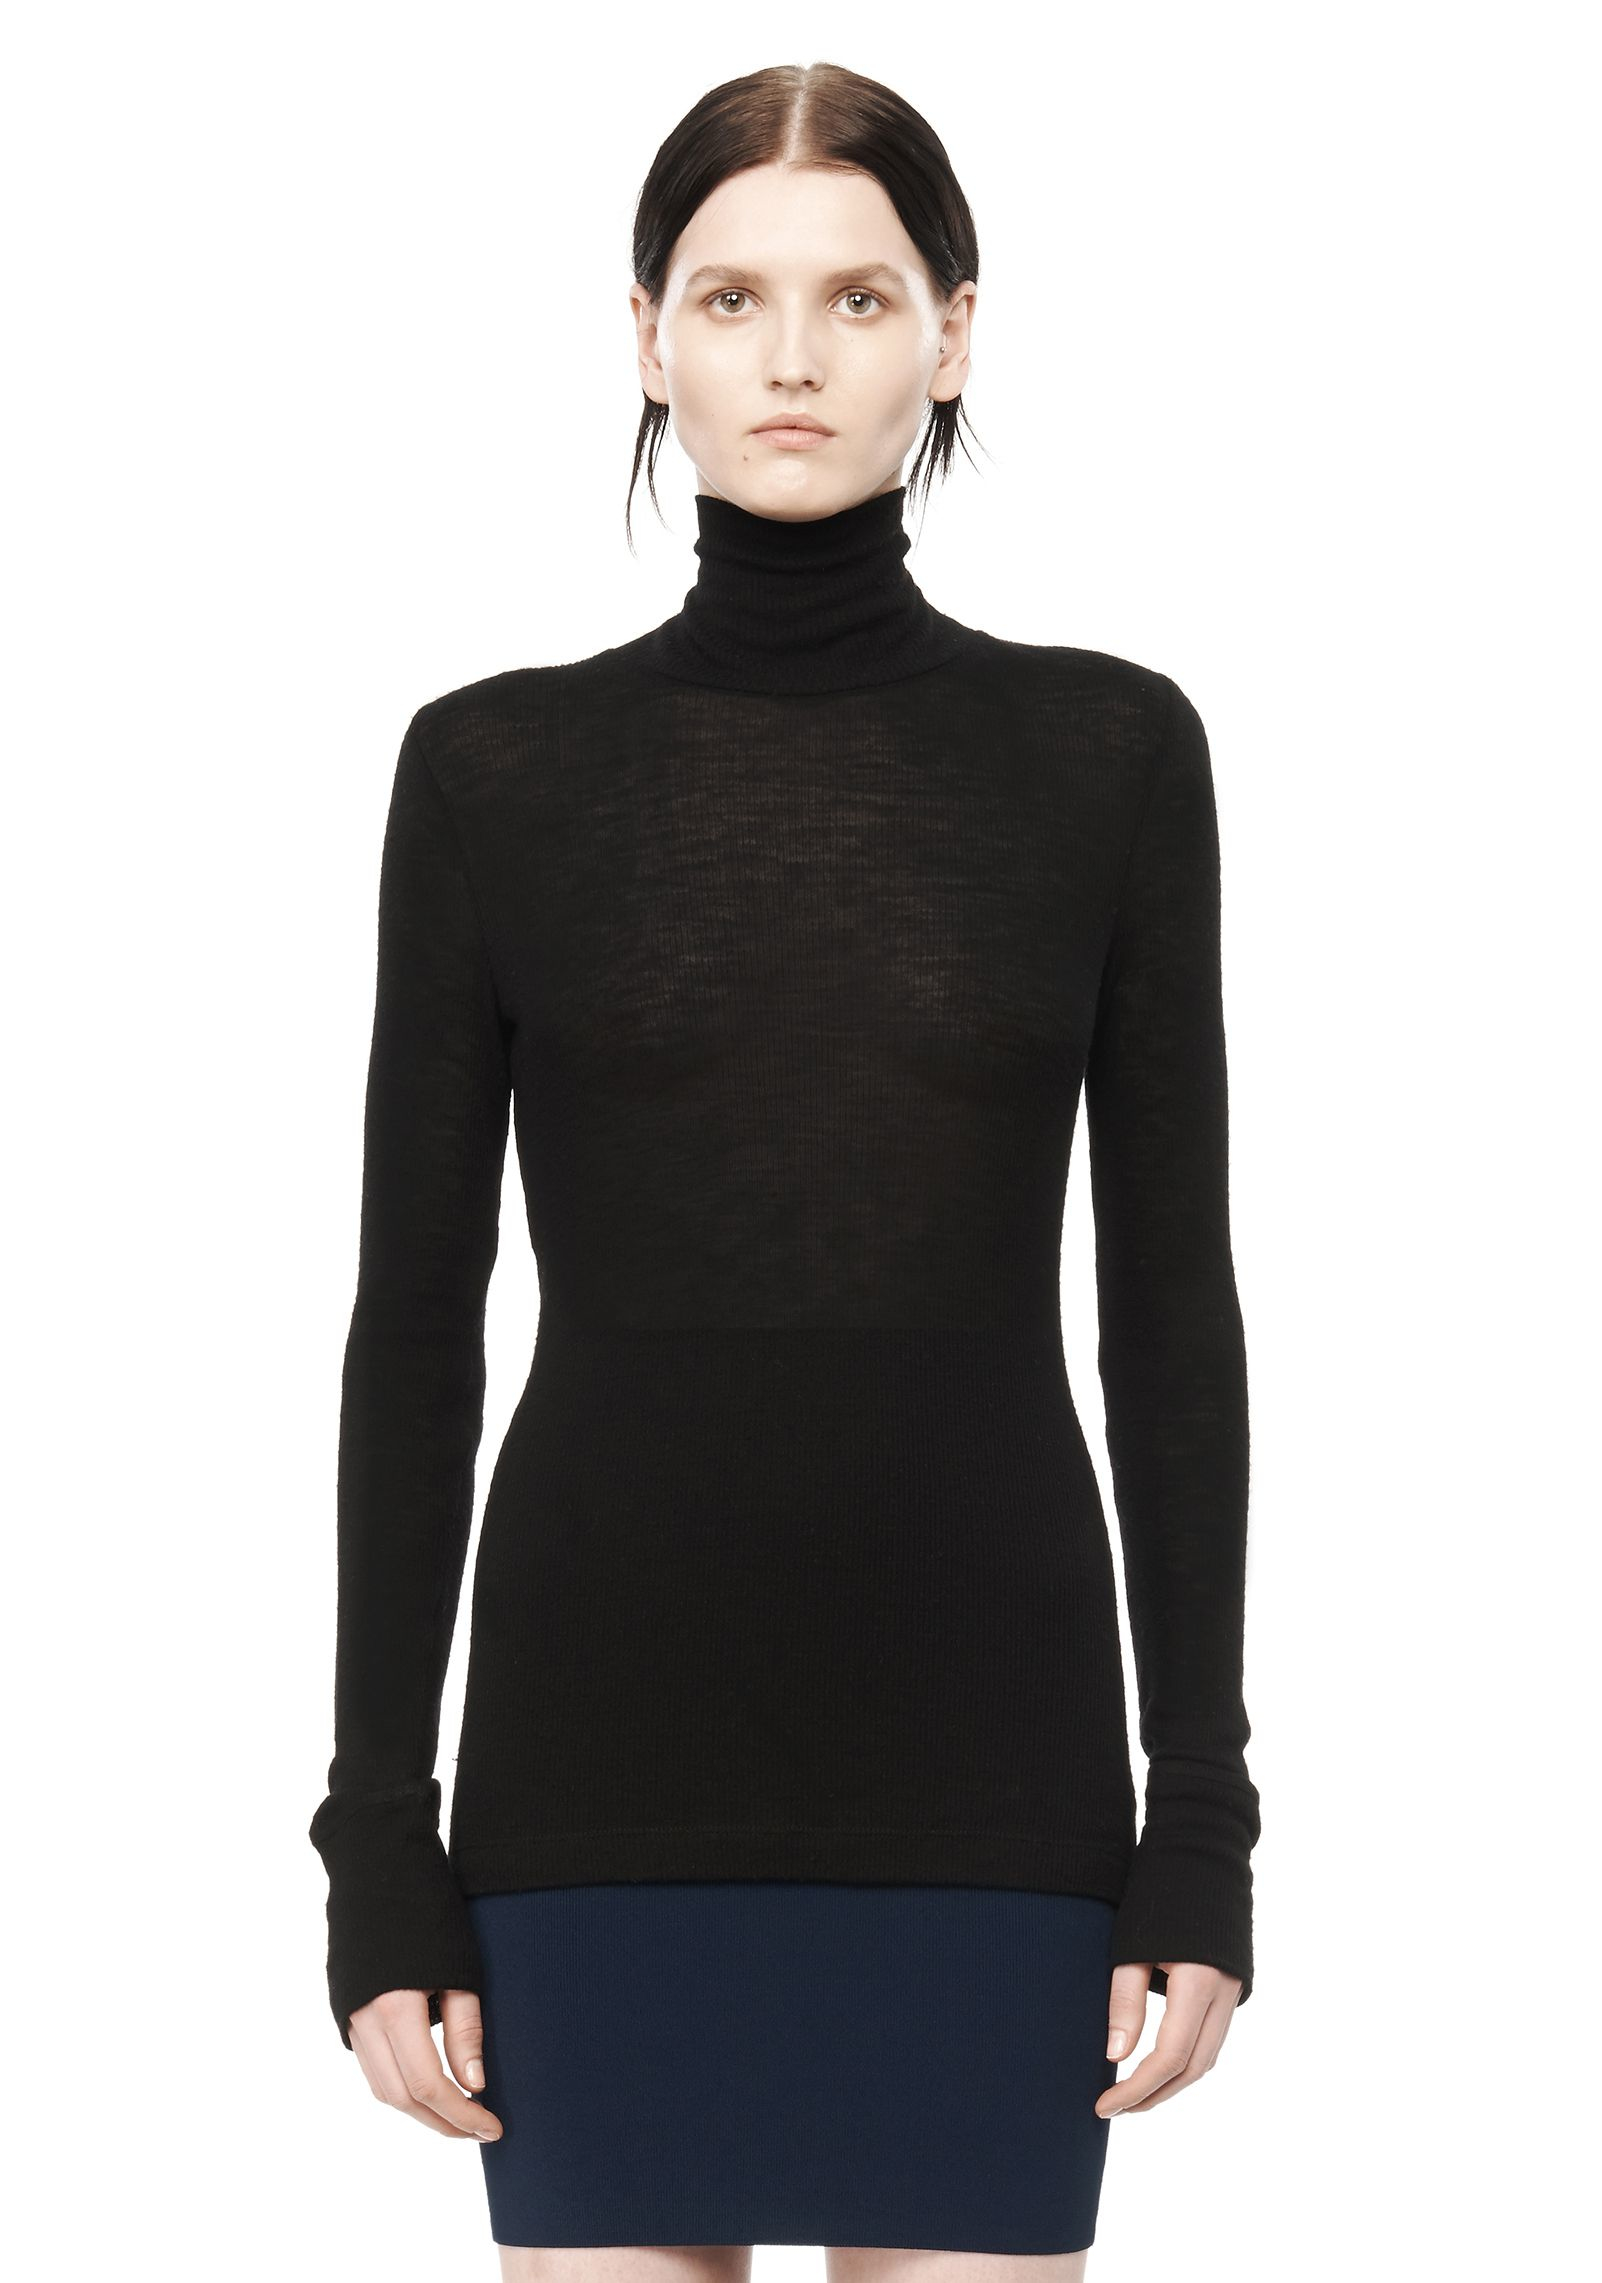 T by alexander wang Ribbed Long Sleeve Turtleneck in Black | Lyst